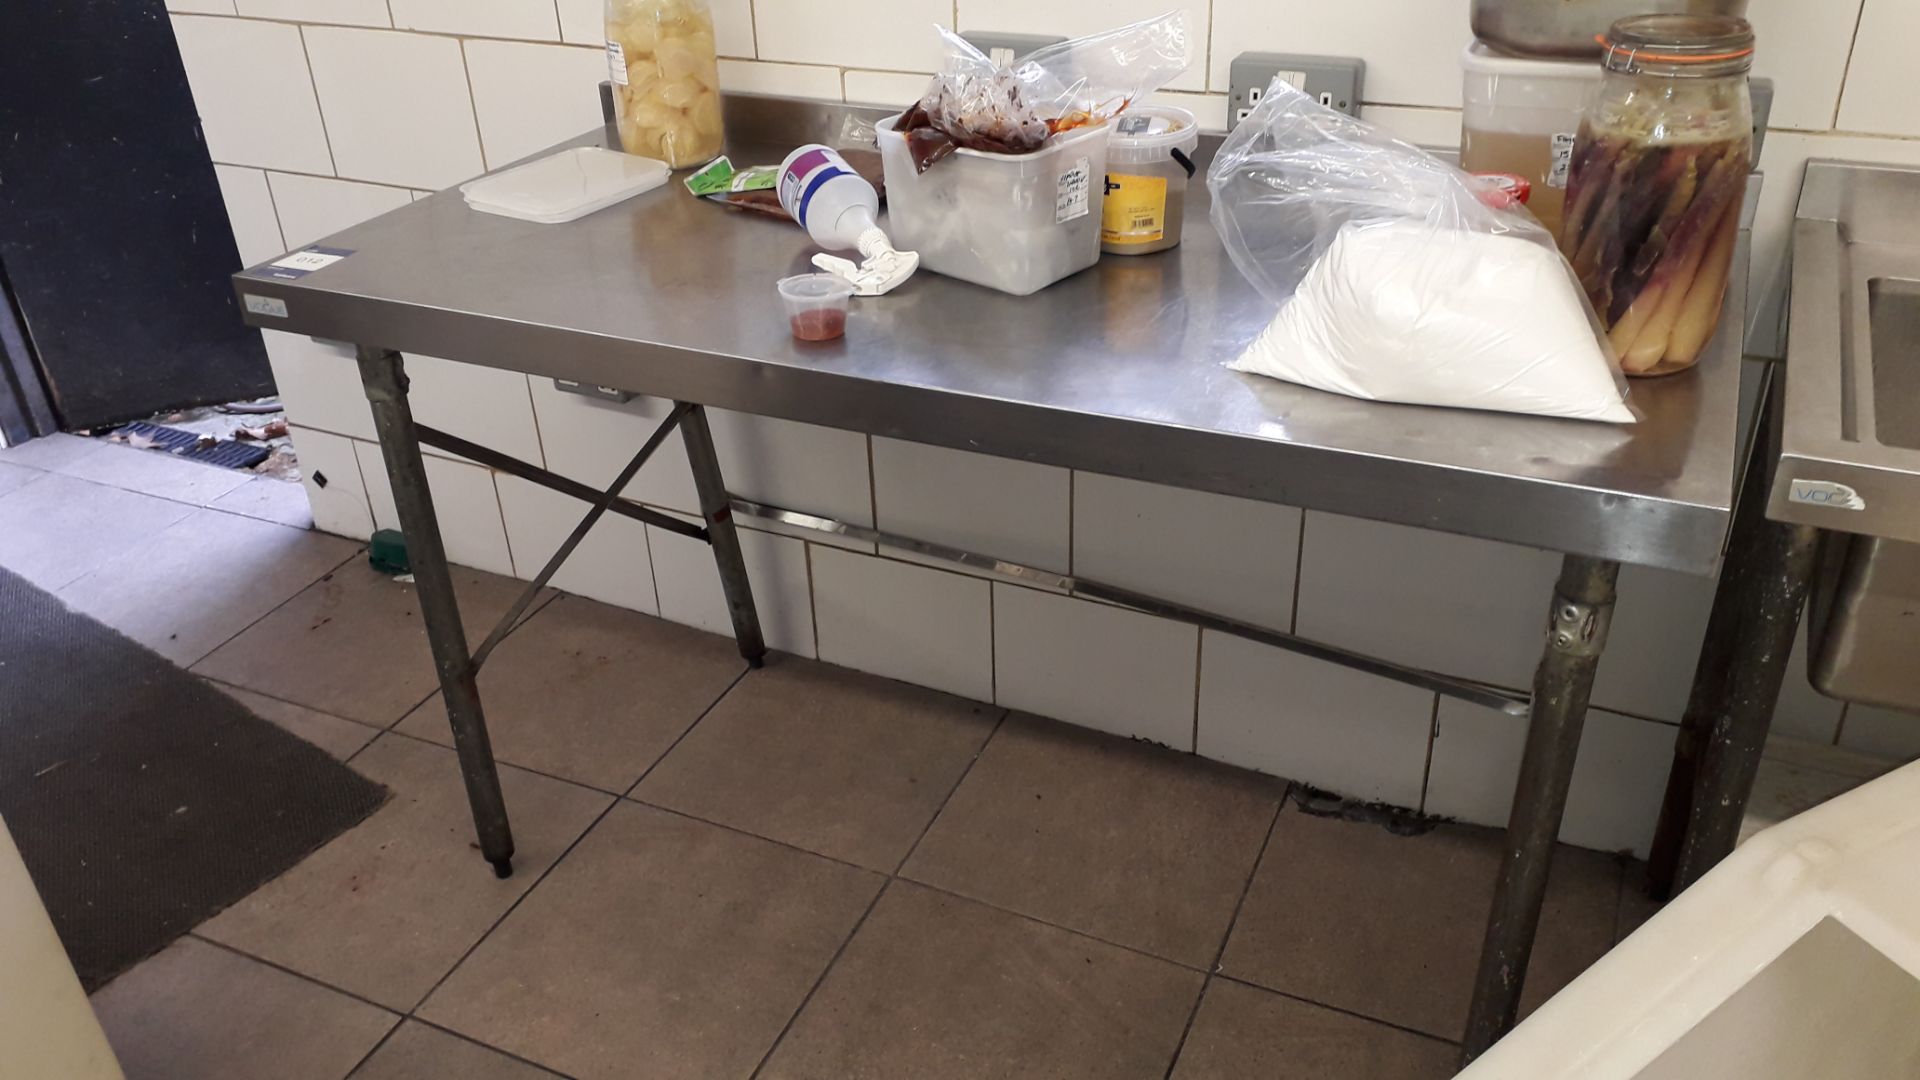 2 x Stainless Steel Topped Food Prep Tables 1500 x 600 - Image 2 of 2